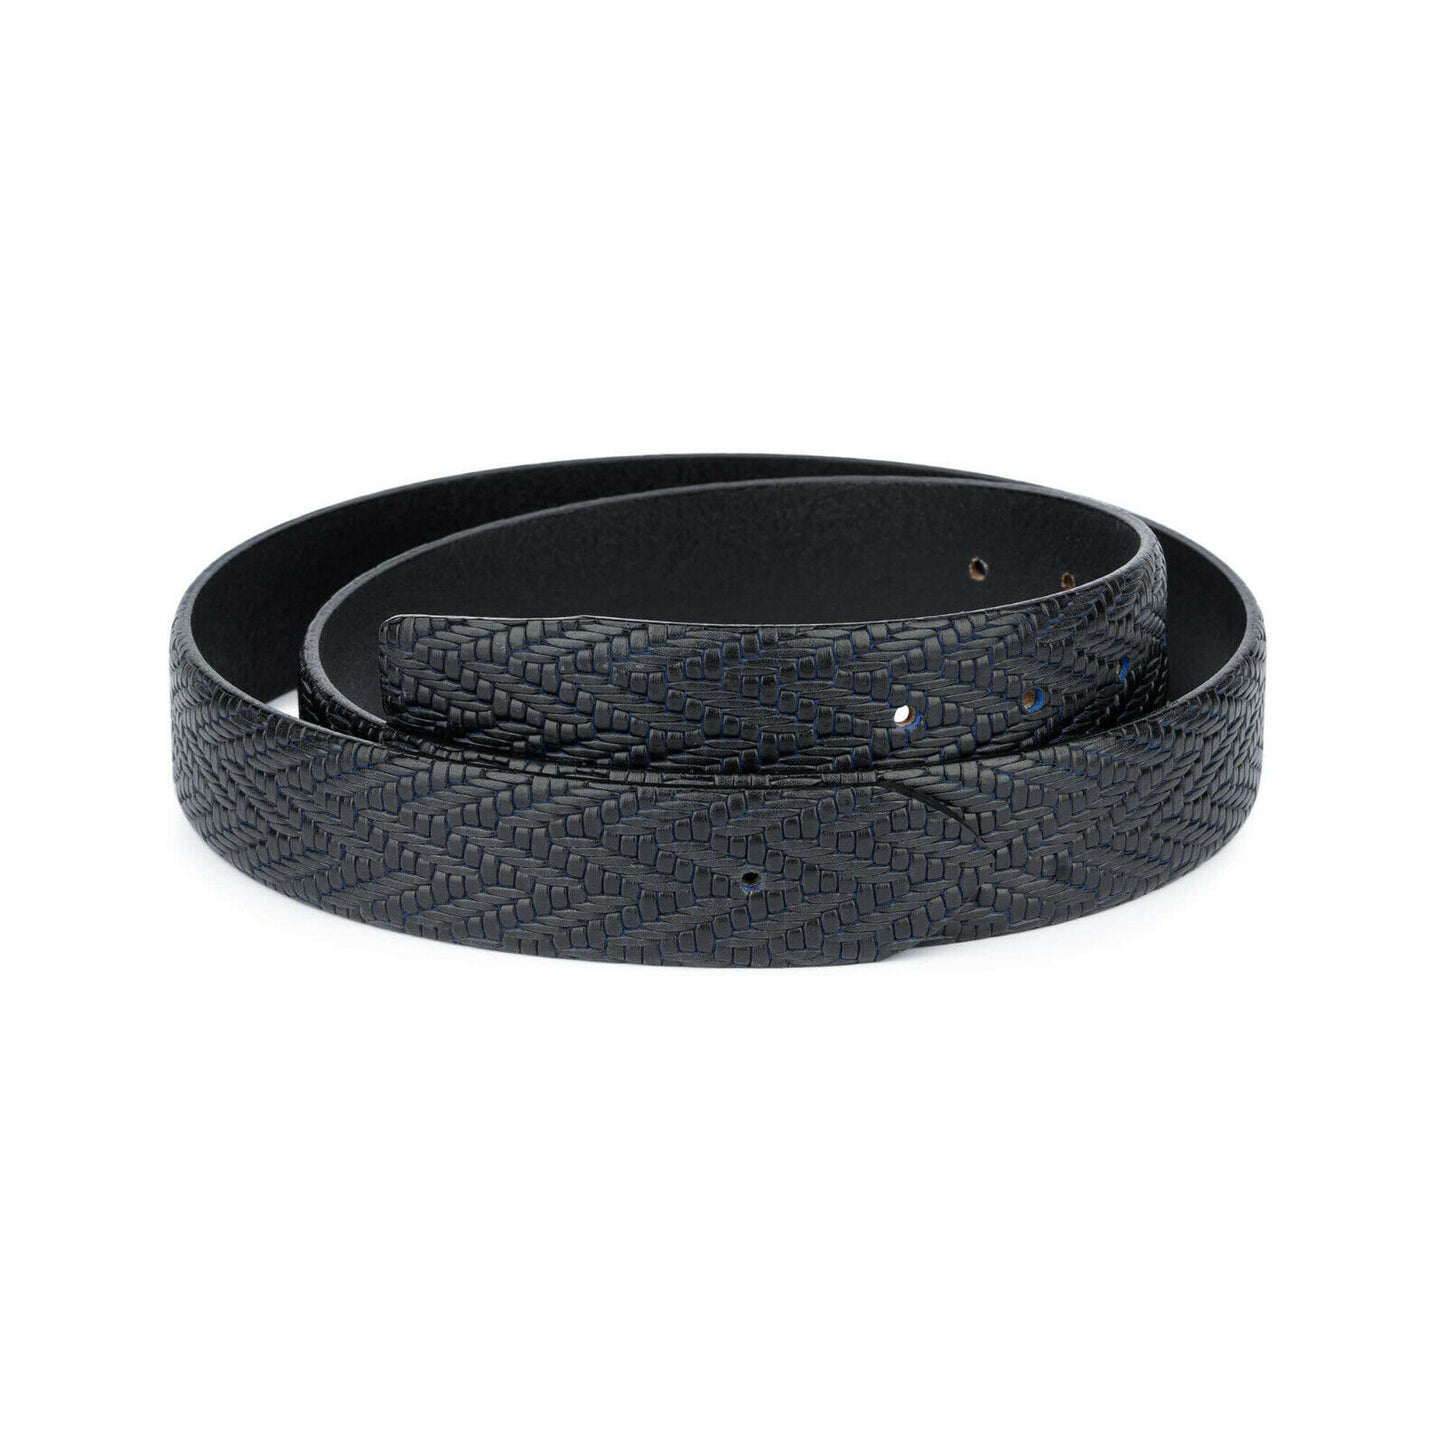 White Belt Mens Strap For Louis Vuitton Buckles 35 Mm Replacement